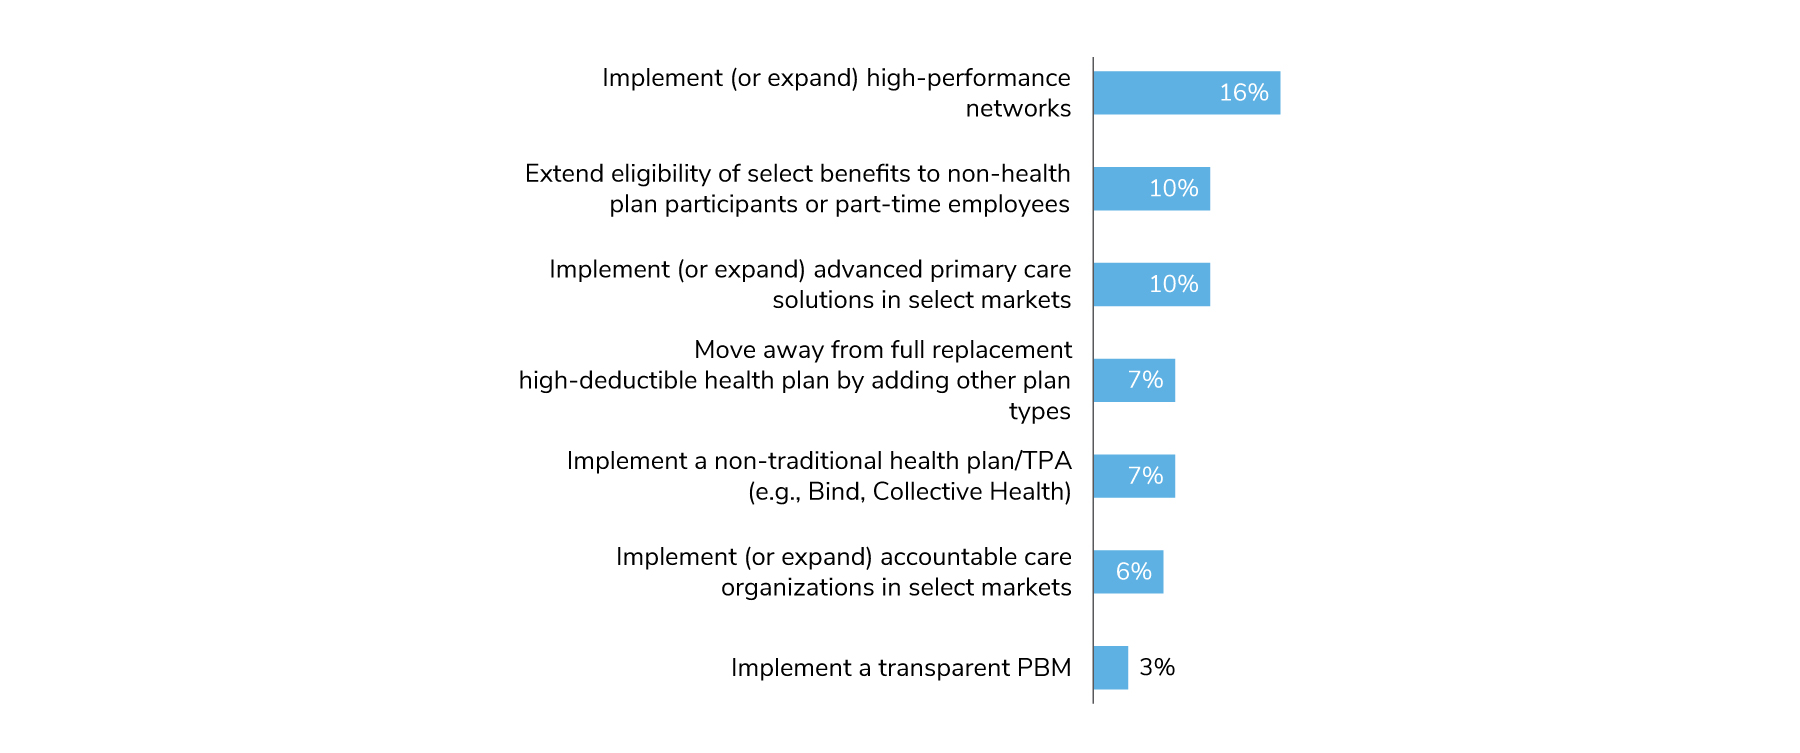 The most common changes taking place in 2023 are implementing HPNs (16%), implementing advanced primary care solutions (10%) and extending select benefits to more employees (10%).